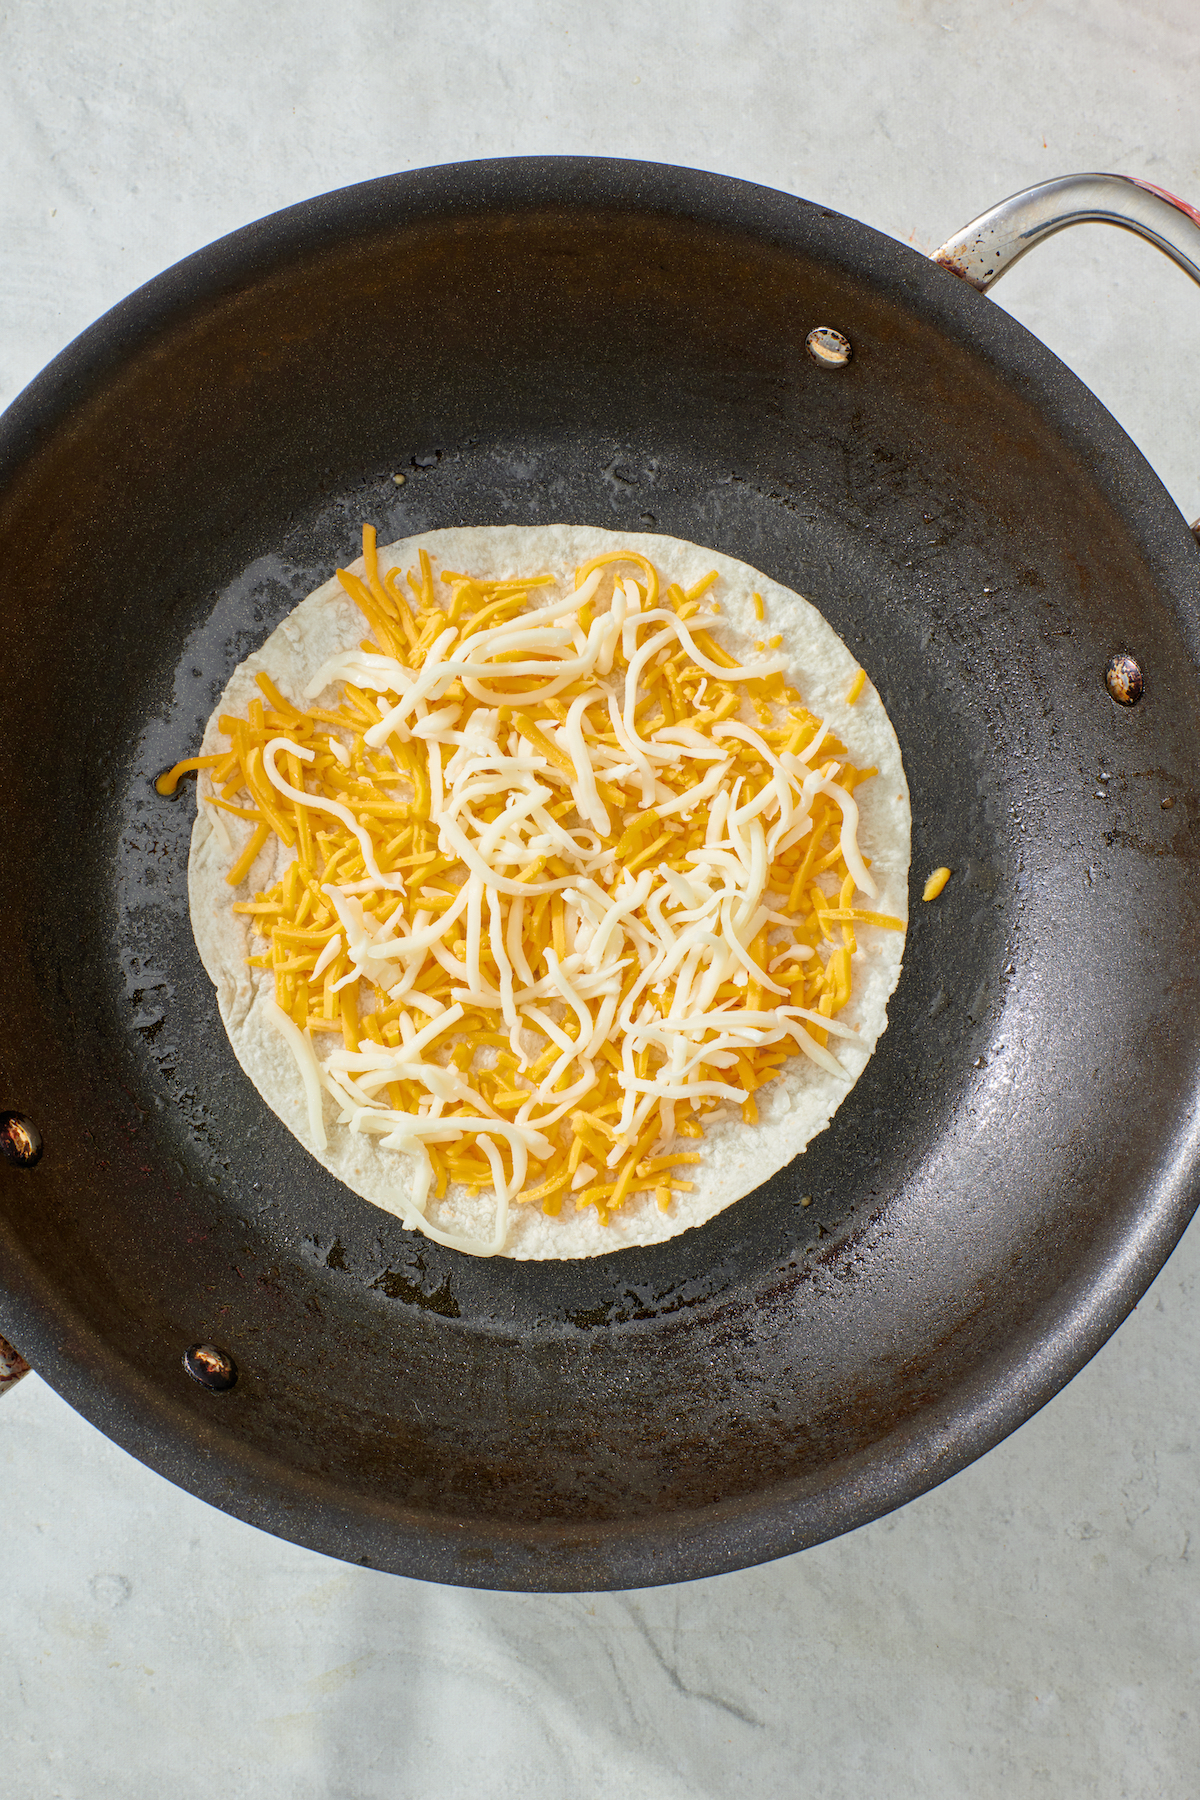 Cheese on tortilla in frying pan.